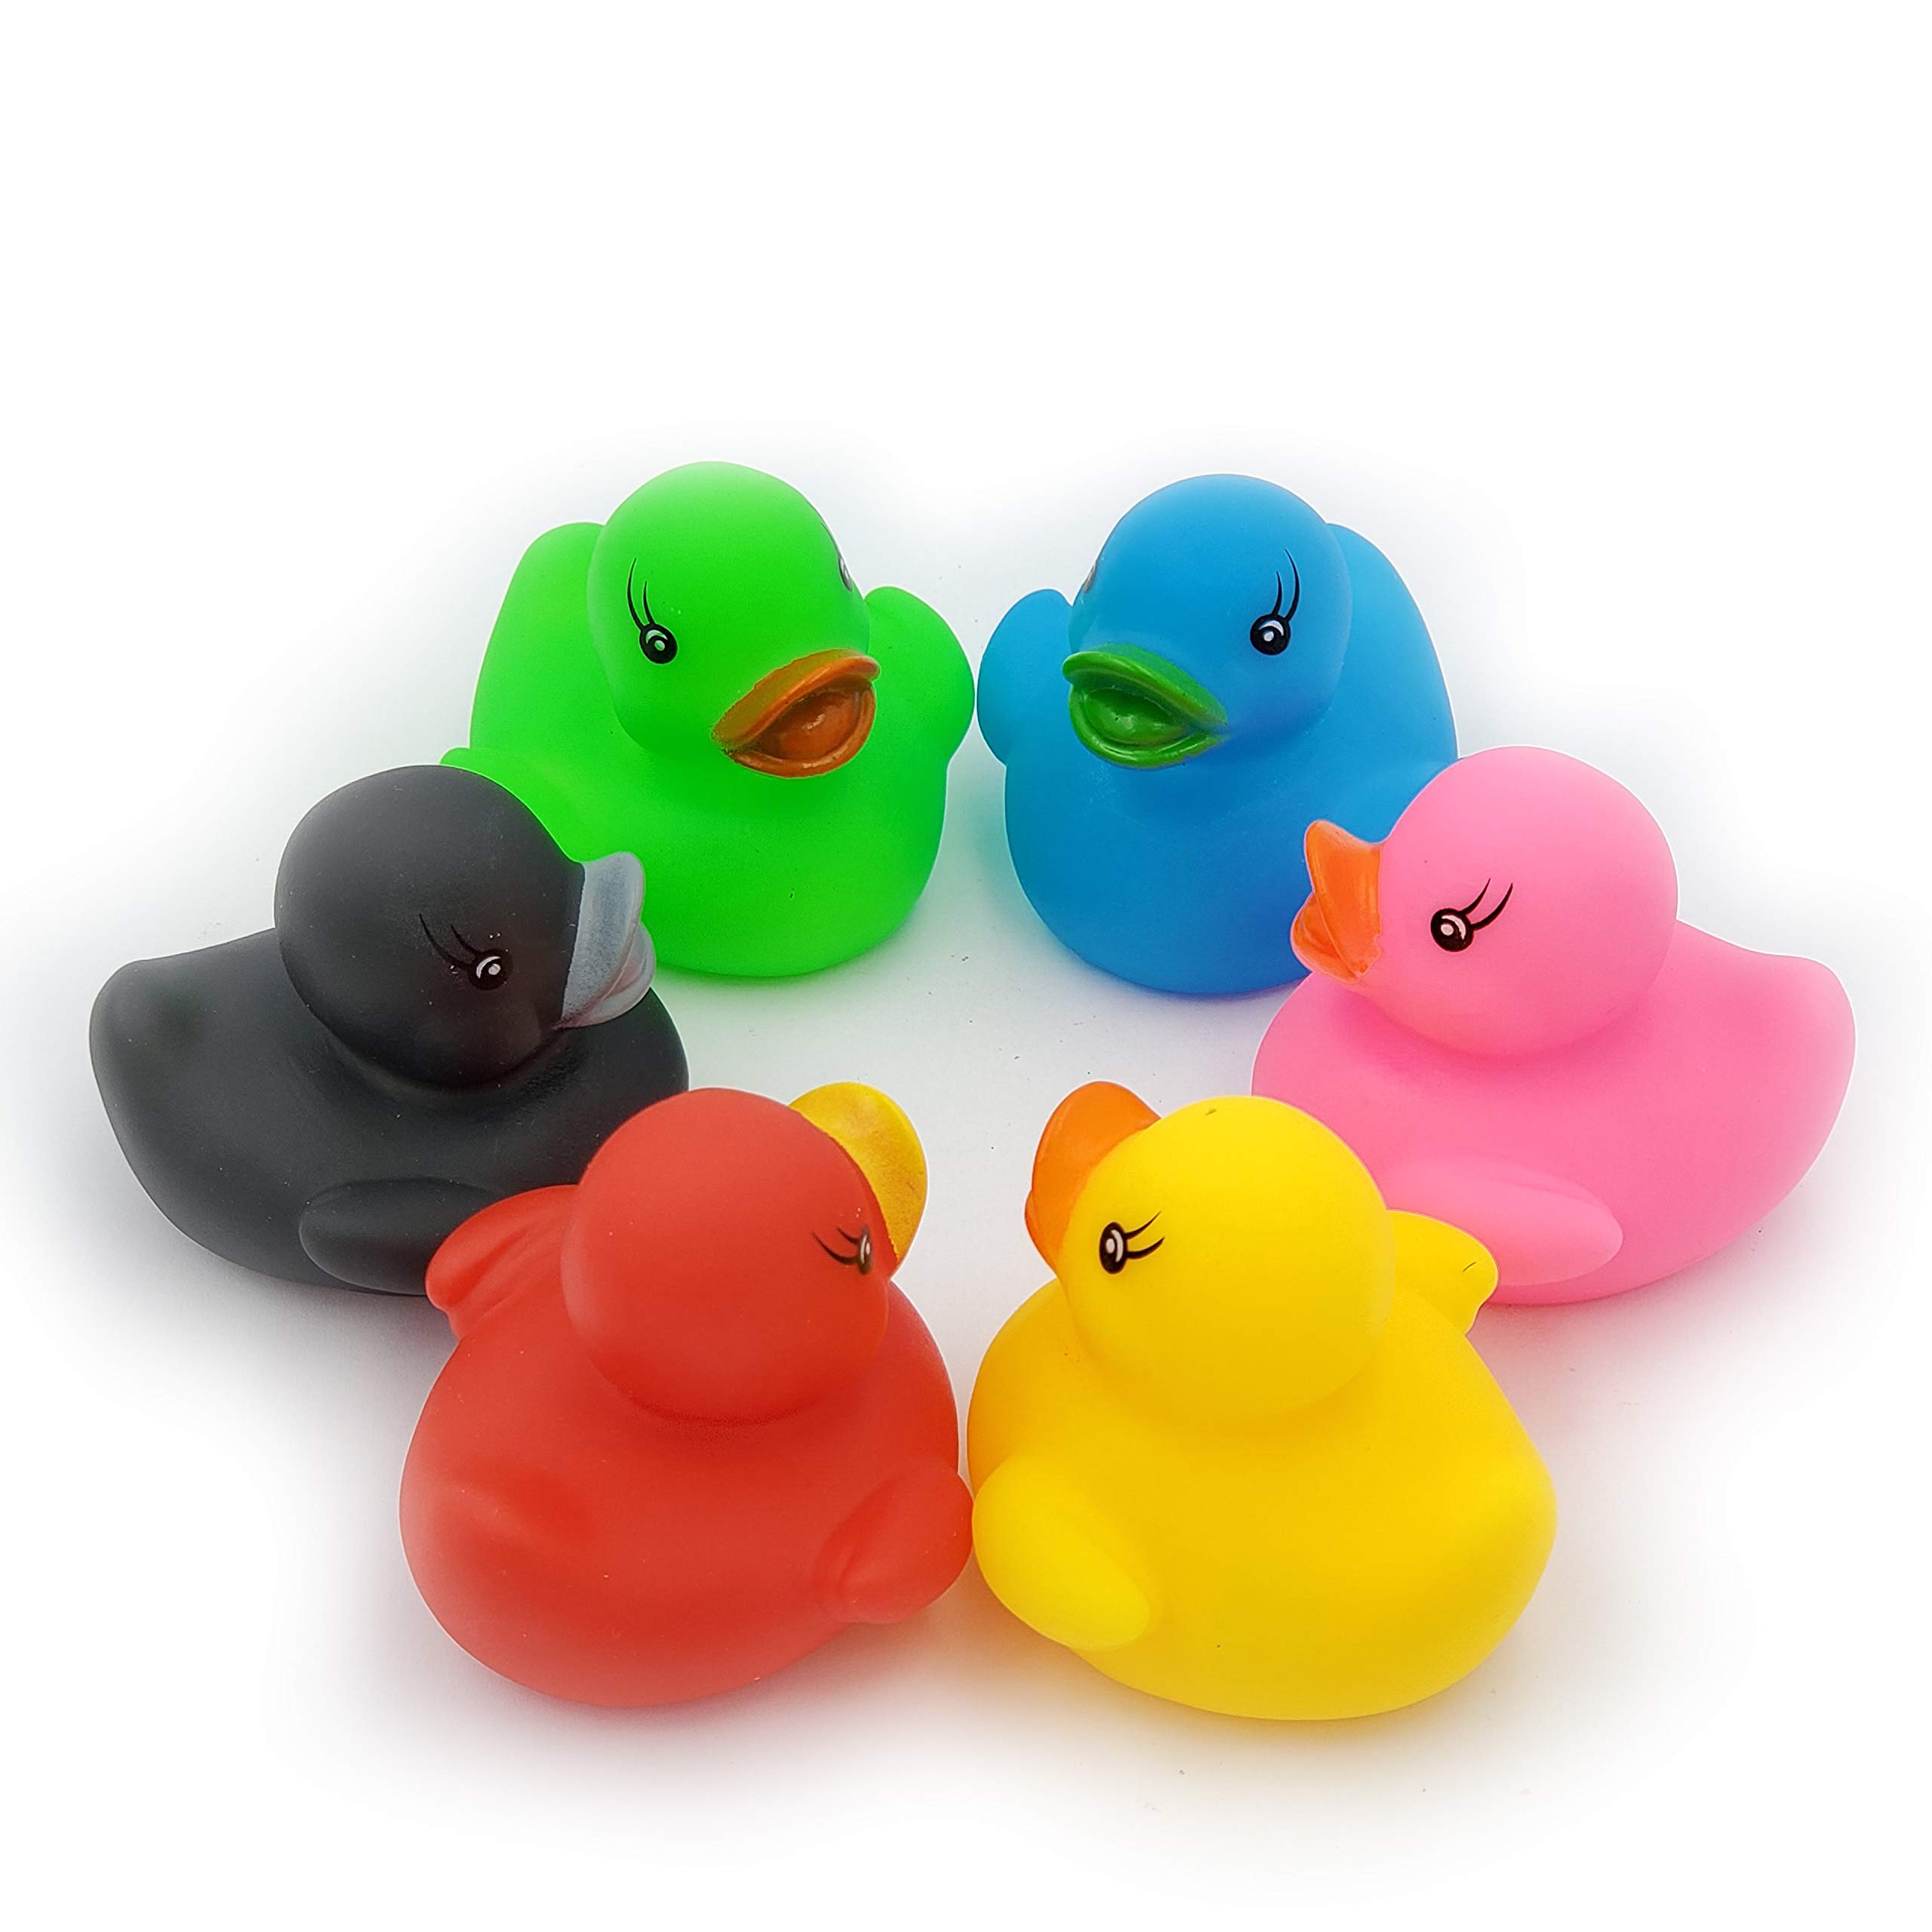 Classic Rubber Duck Toy Duckies for Kids, Six Solid Colors, Bath Birthday Gifts Baby Showers Classroom Summer Beach and Pool Activity, 2" (12-Pack)